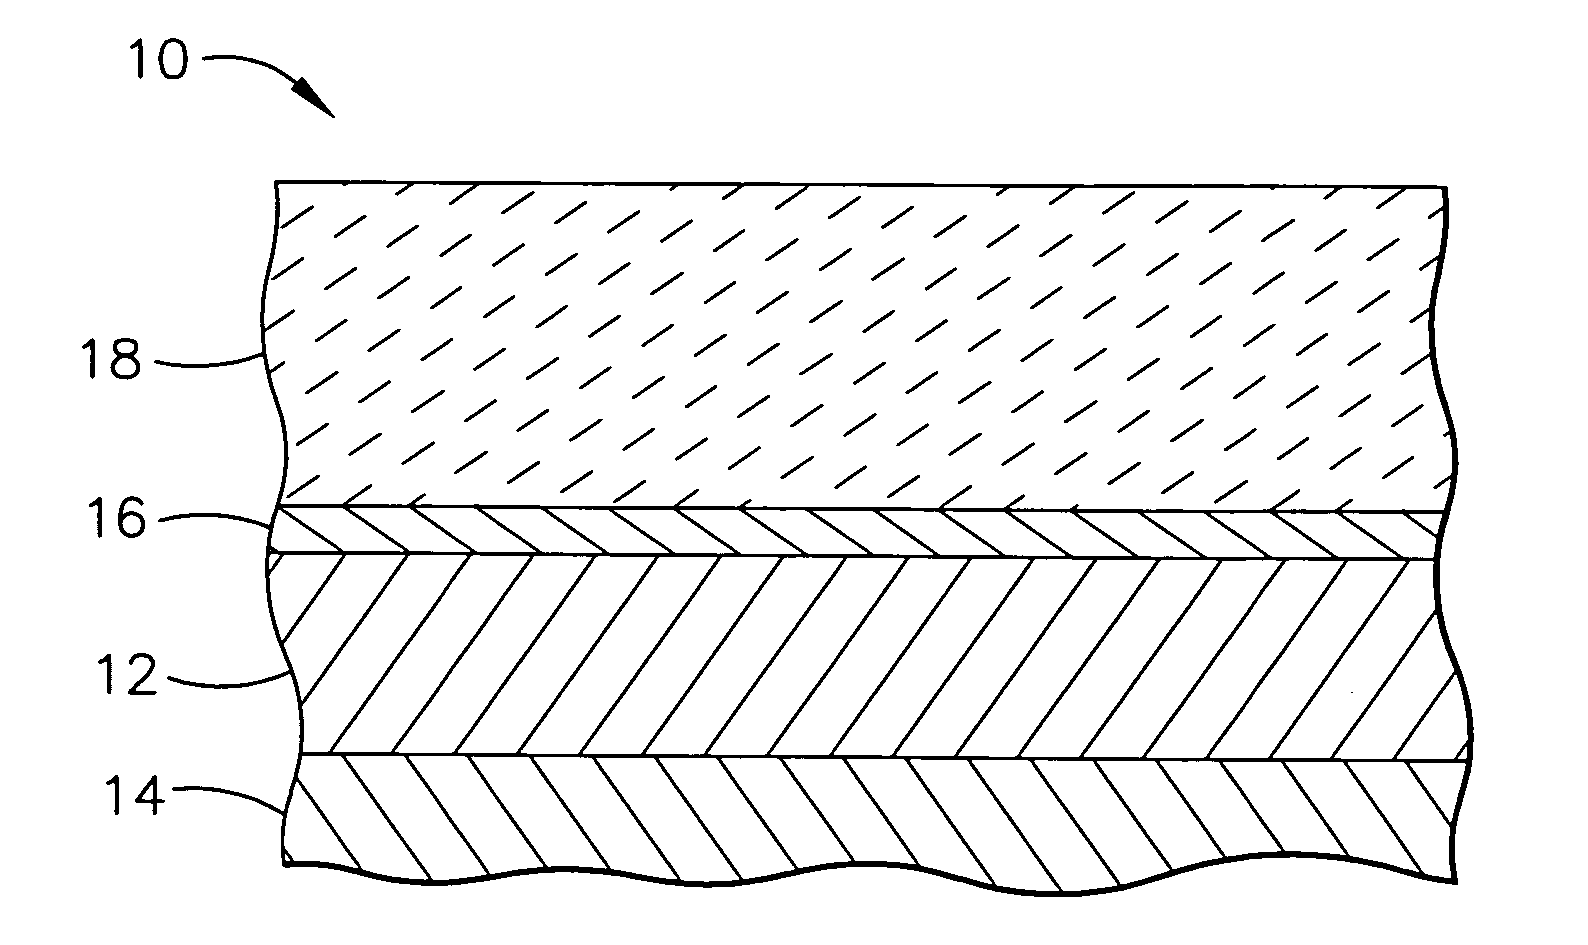 Low thermal conductivity thermal barrier coating system and method therefor